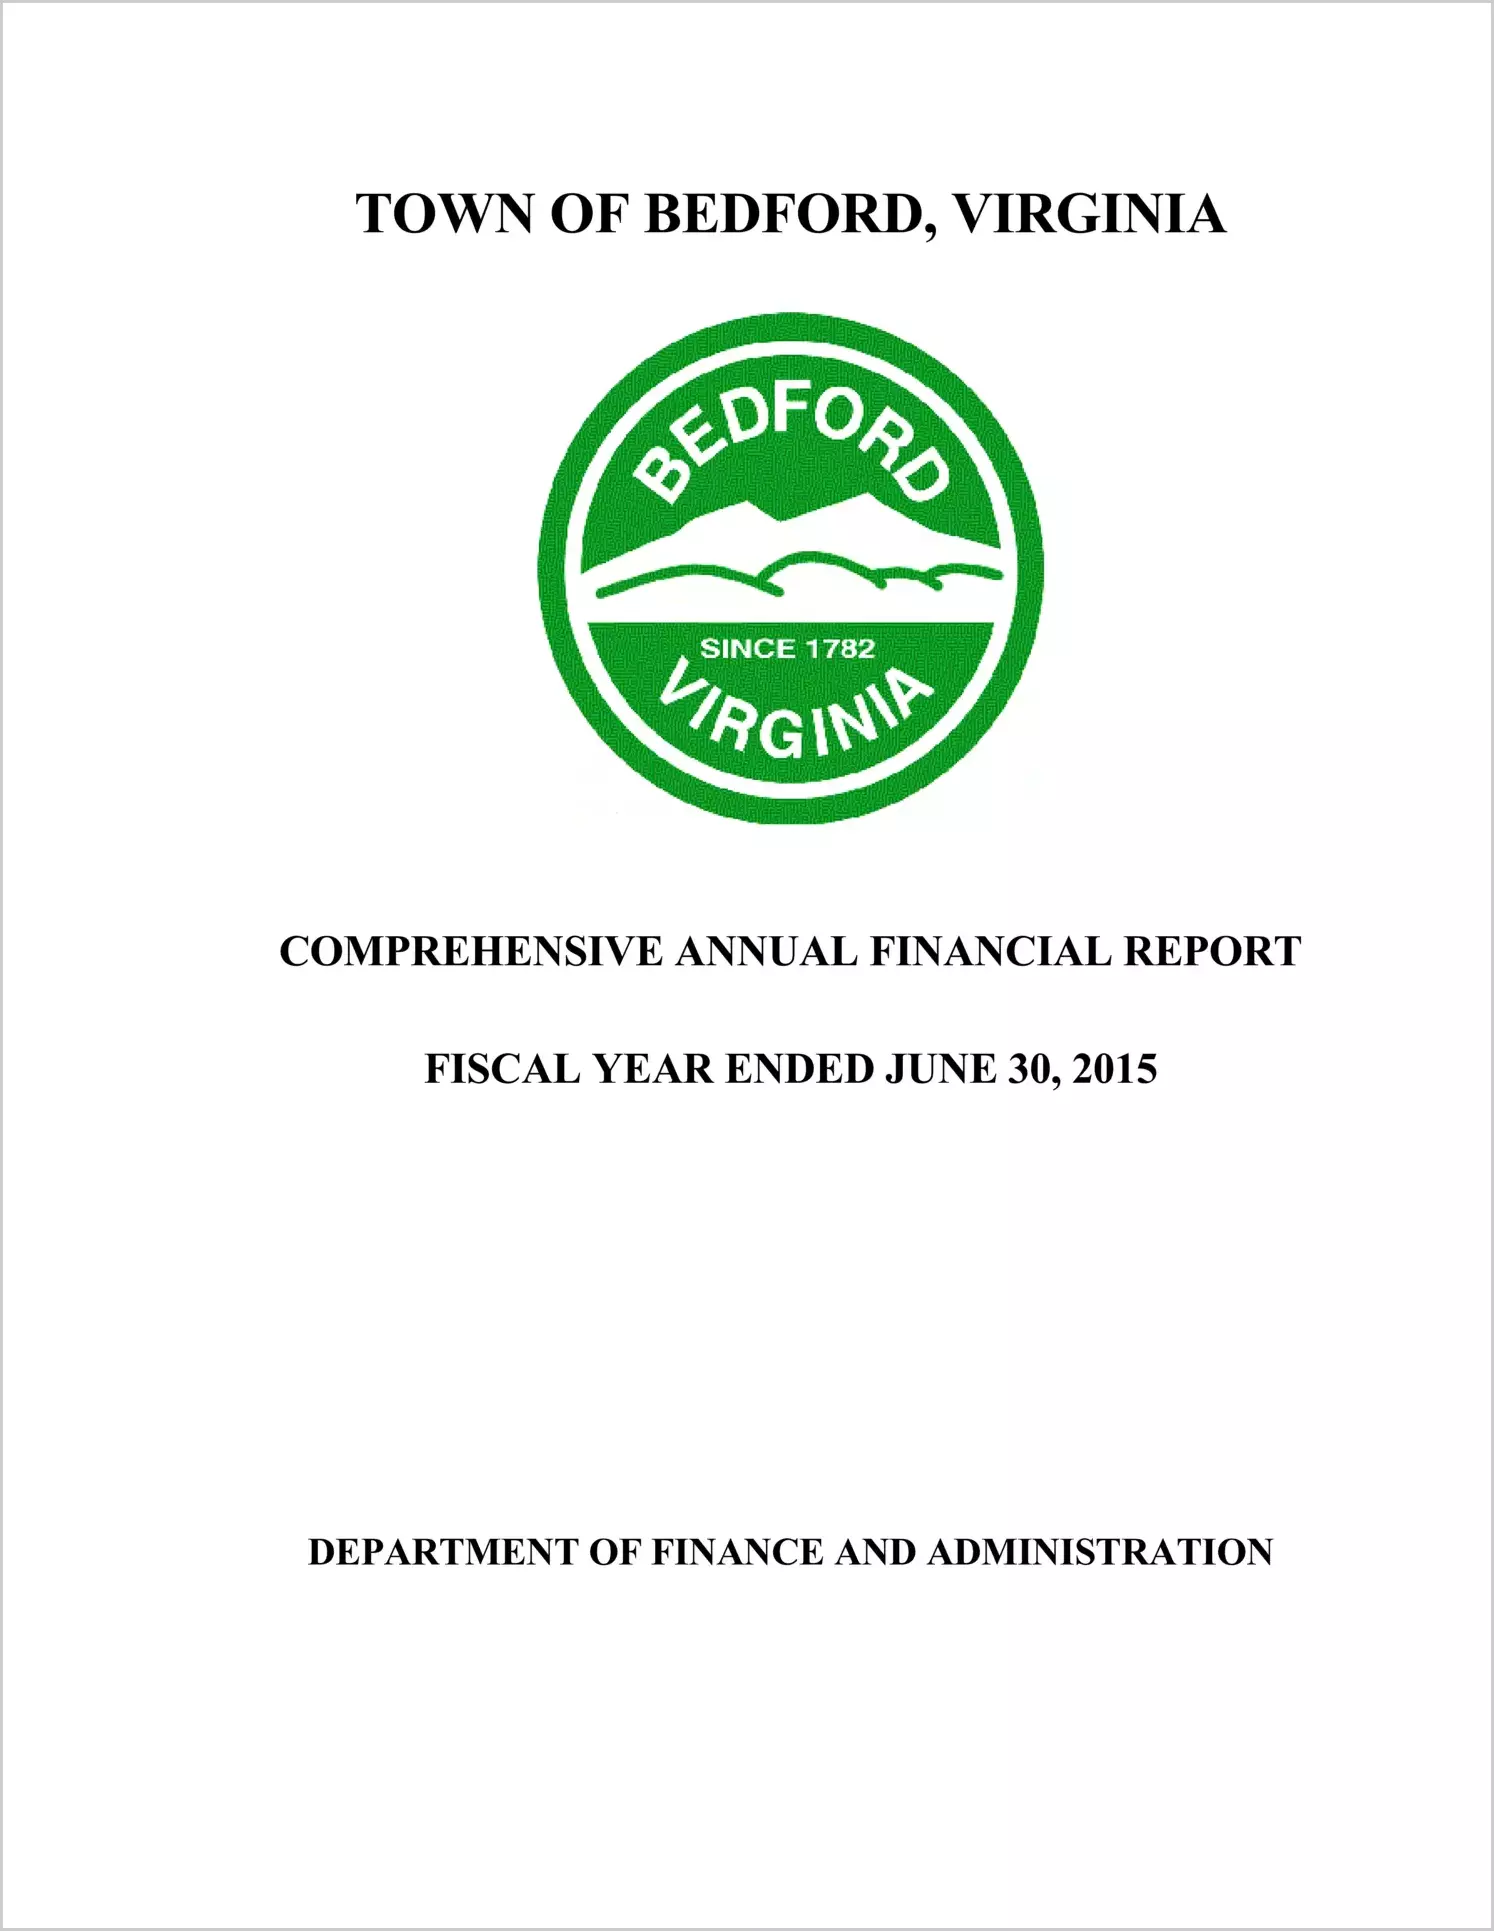 2015 Annual Financial Report for Town of Bedford